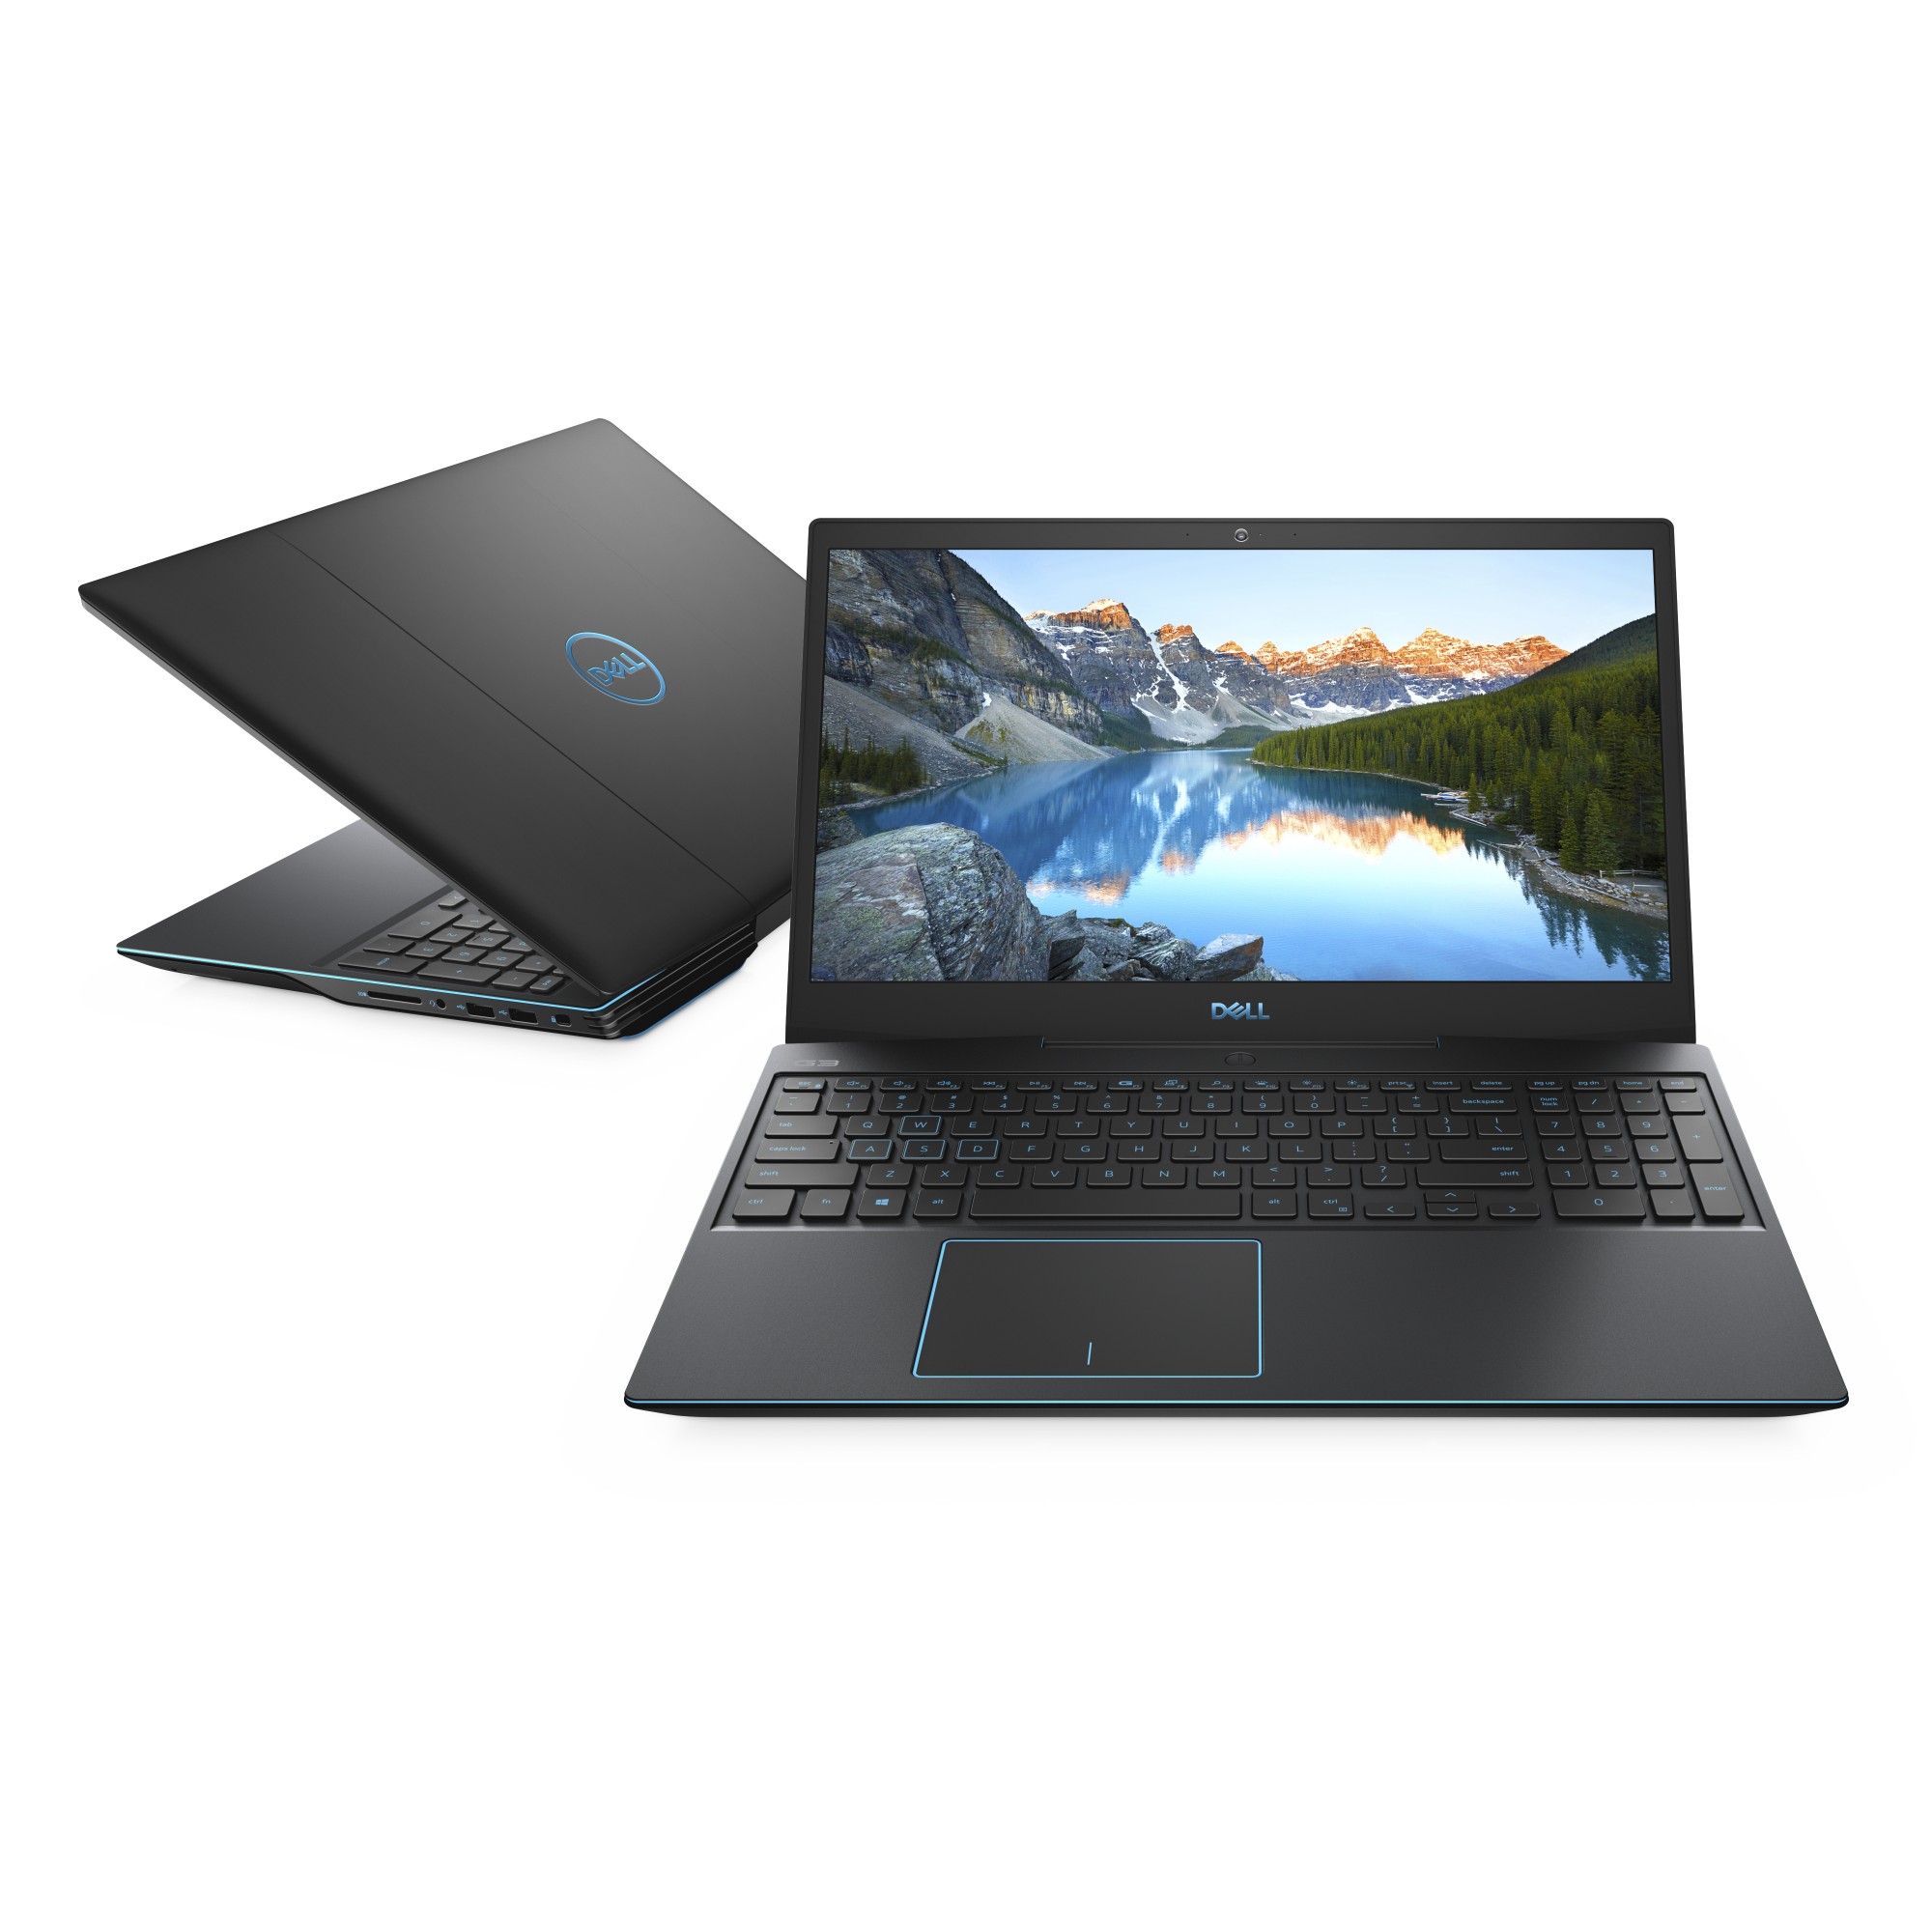 DELL G3 3500 Notebook 39.6 cm (15.6